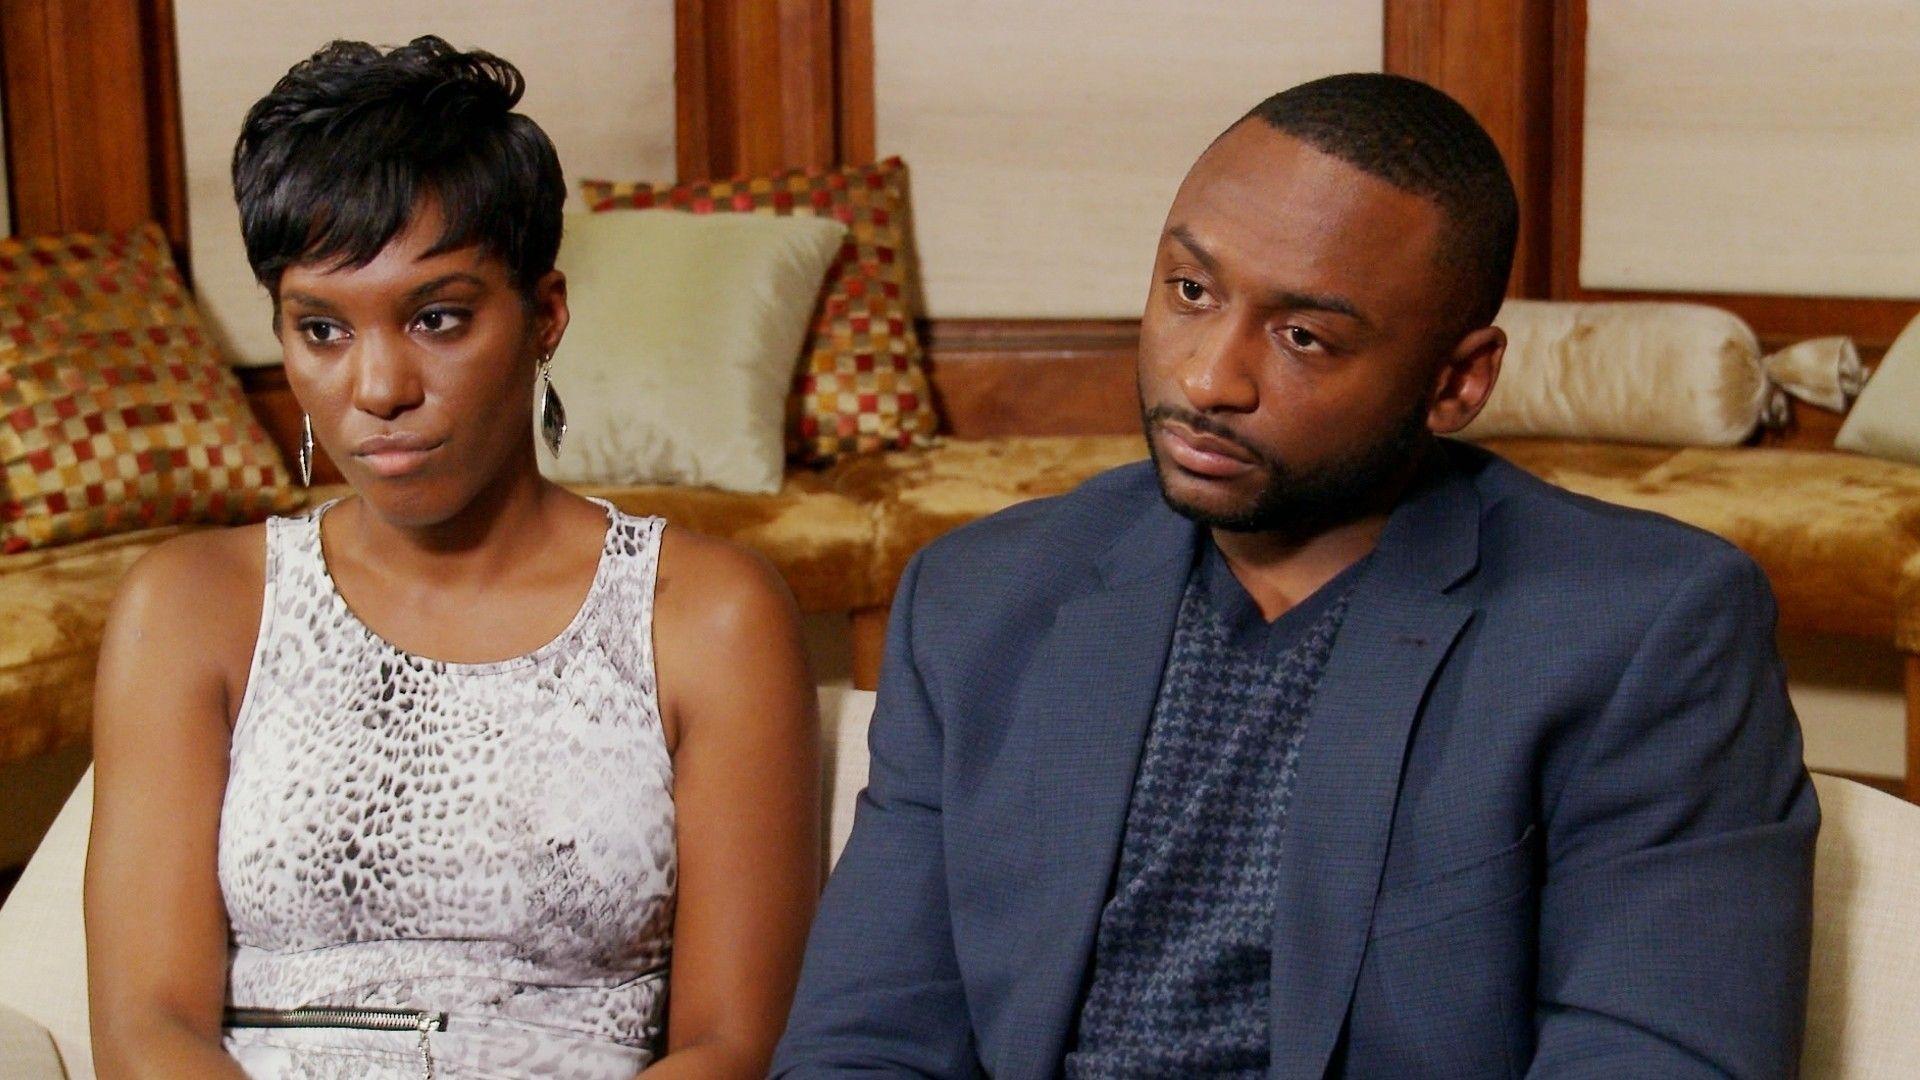 Chicago Area Couples On 'Married At First Sight' Reveal If They